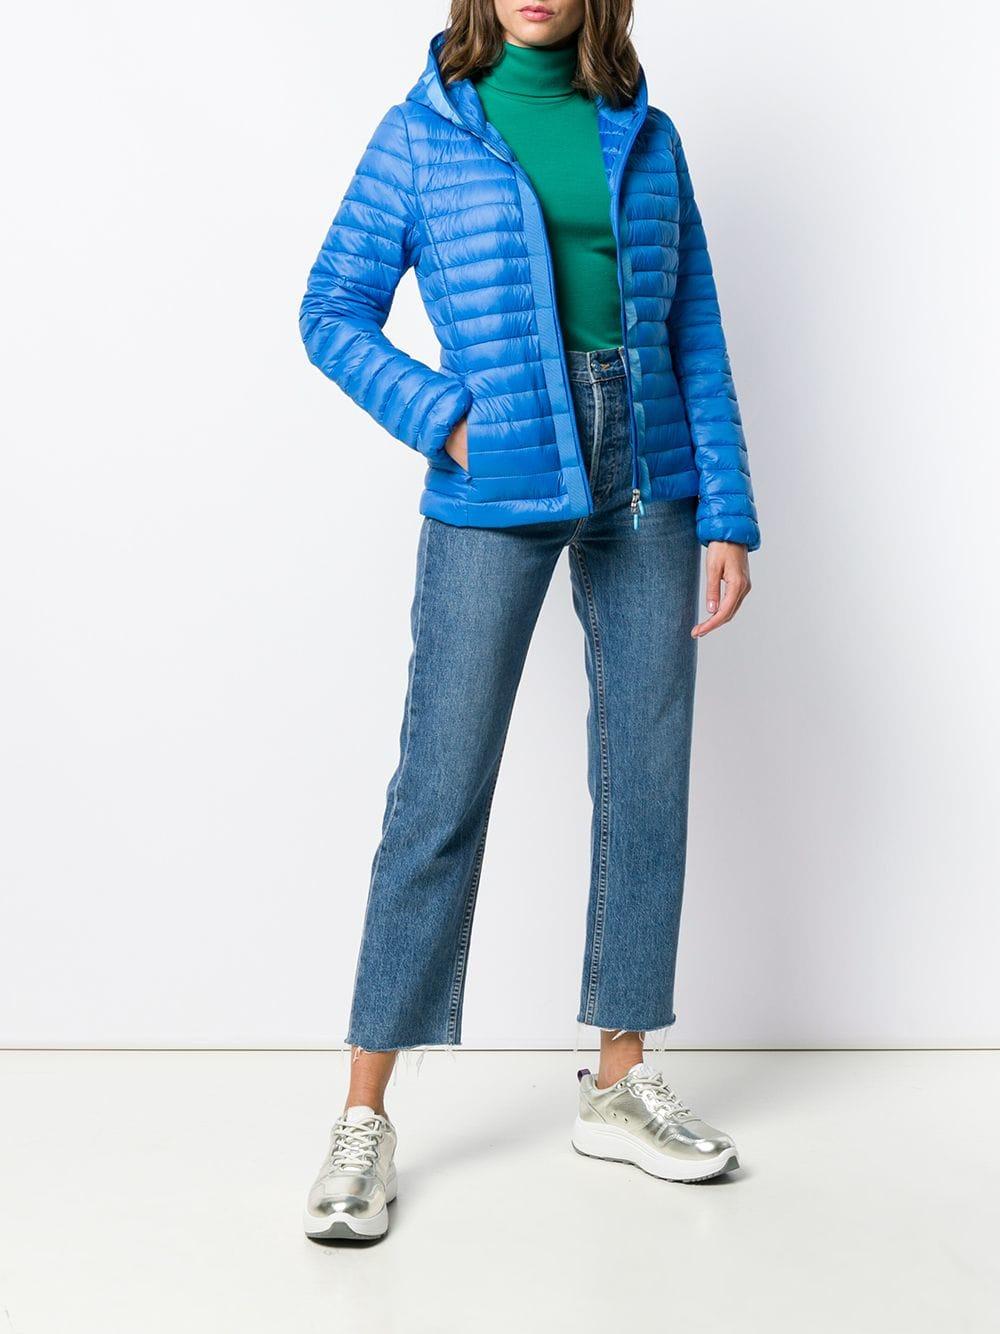 Lyst - Save The Duck Hooded Padded Jacket in Blue